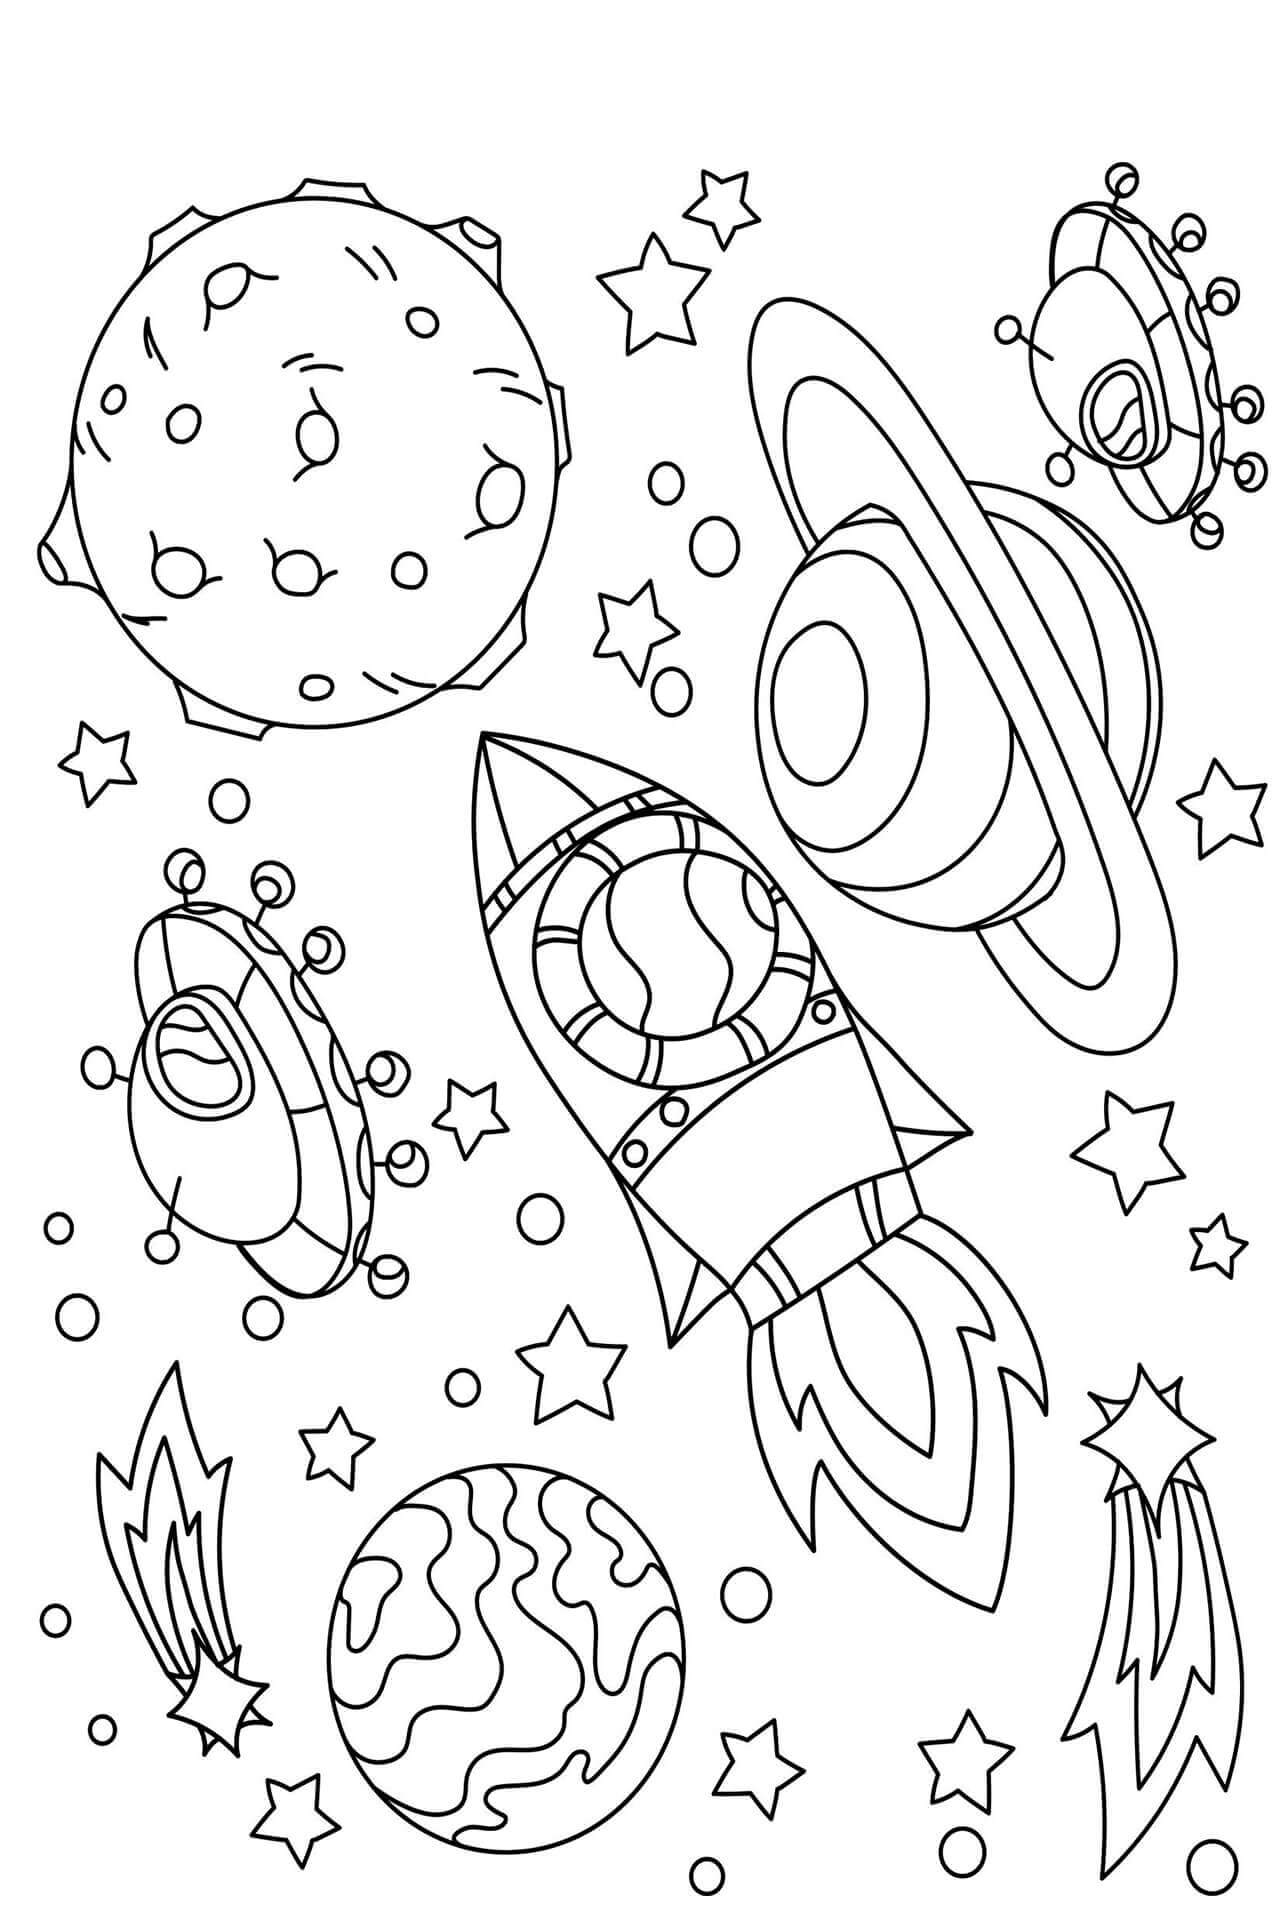 Incredible planets coloring book for 4-5 year olds